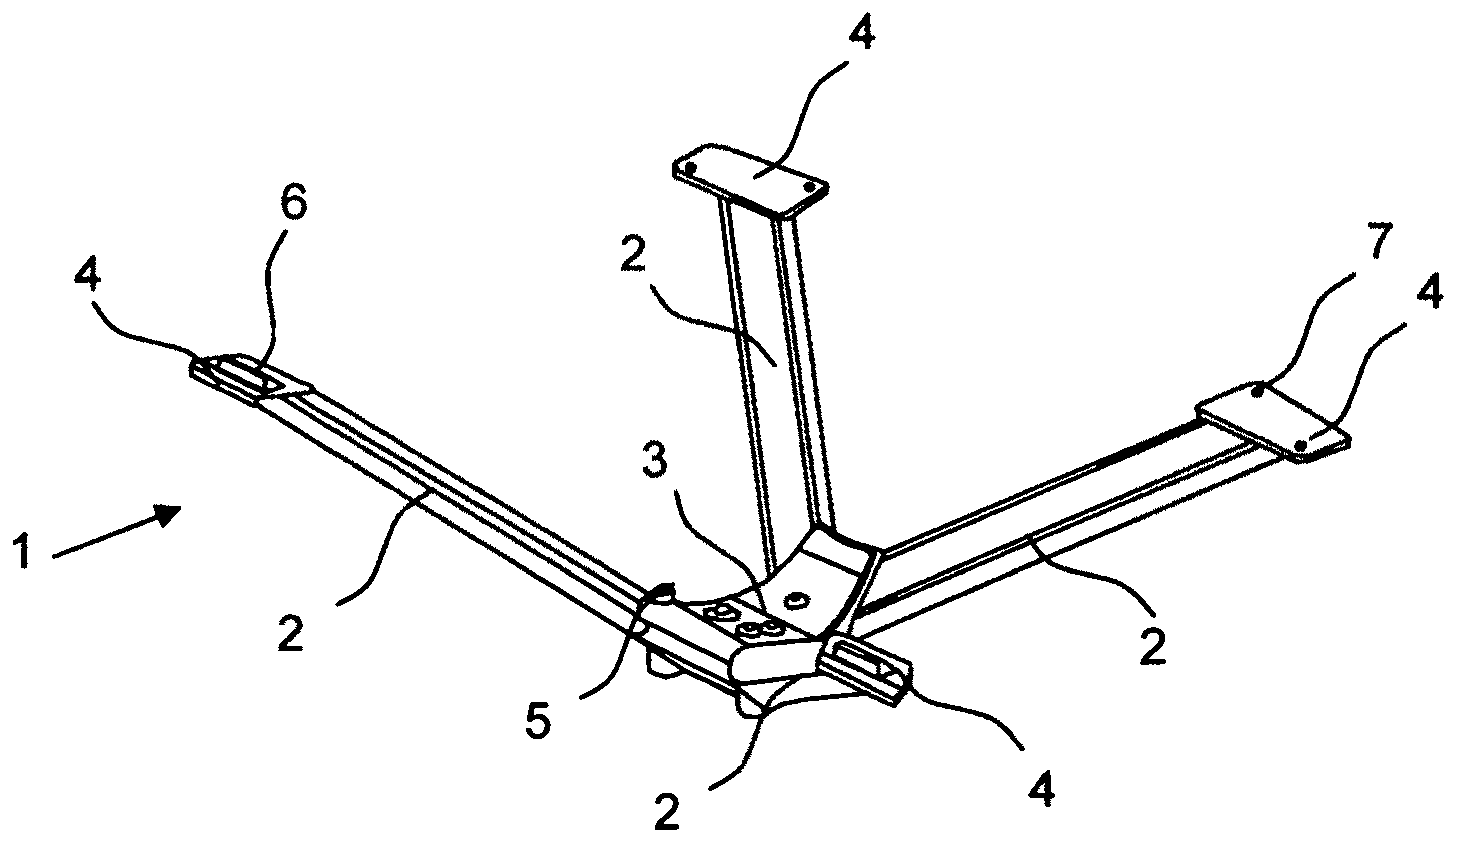 Diagonal strut device, method for manufacturing same and motor vehicle underfloor reinforced by means of diagonal structure device